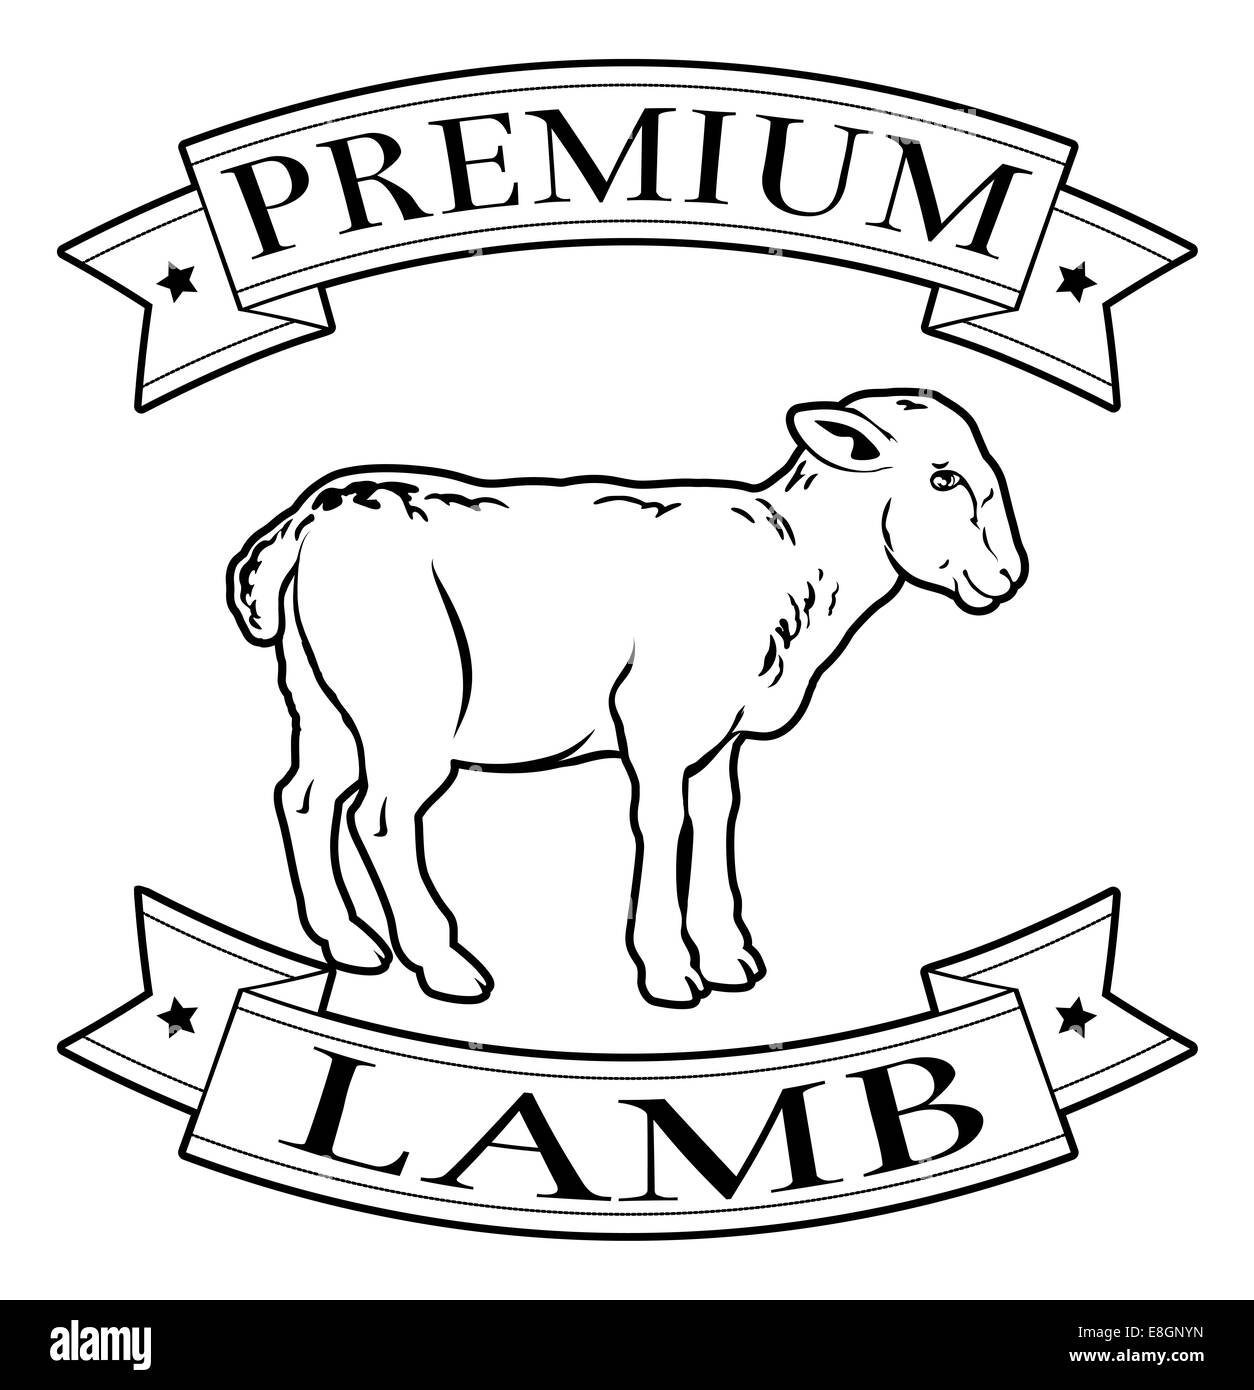 Premium lamb food label featuring an illustration of a sheep Stock Photo